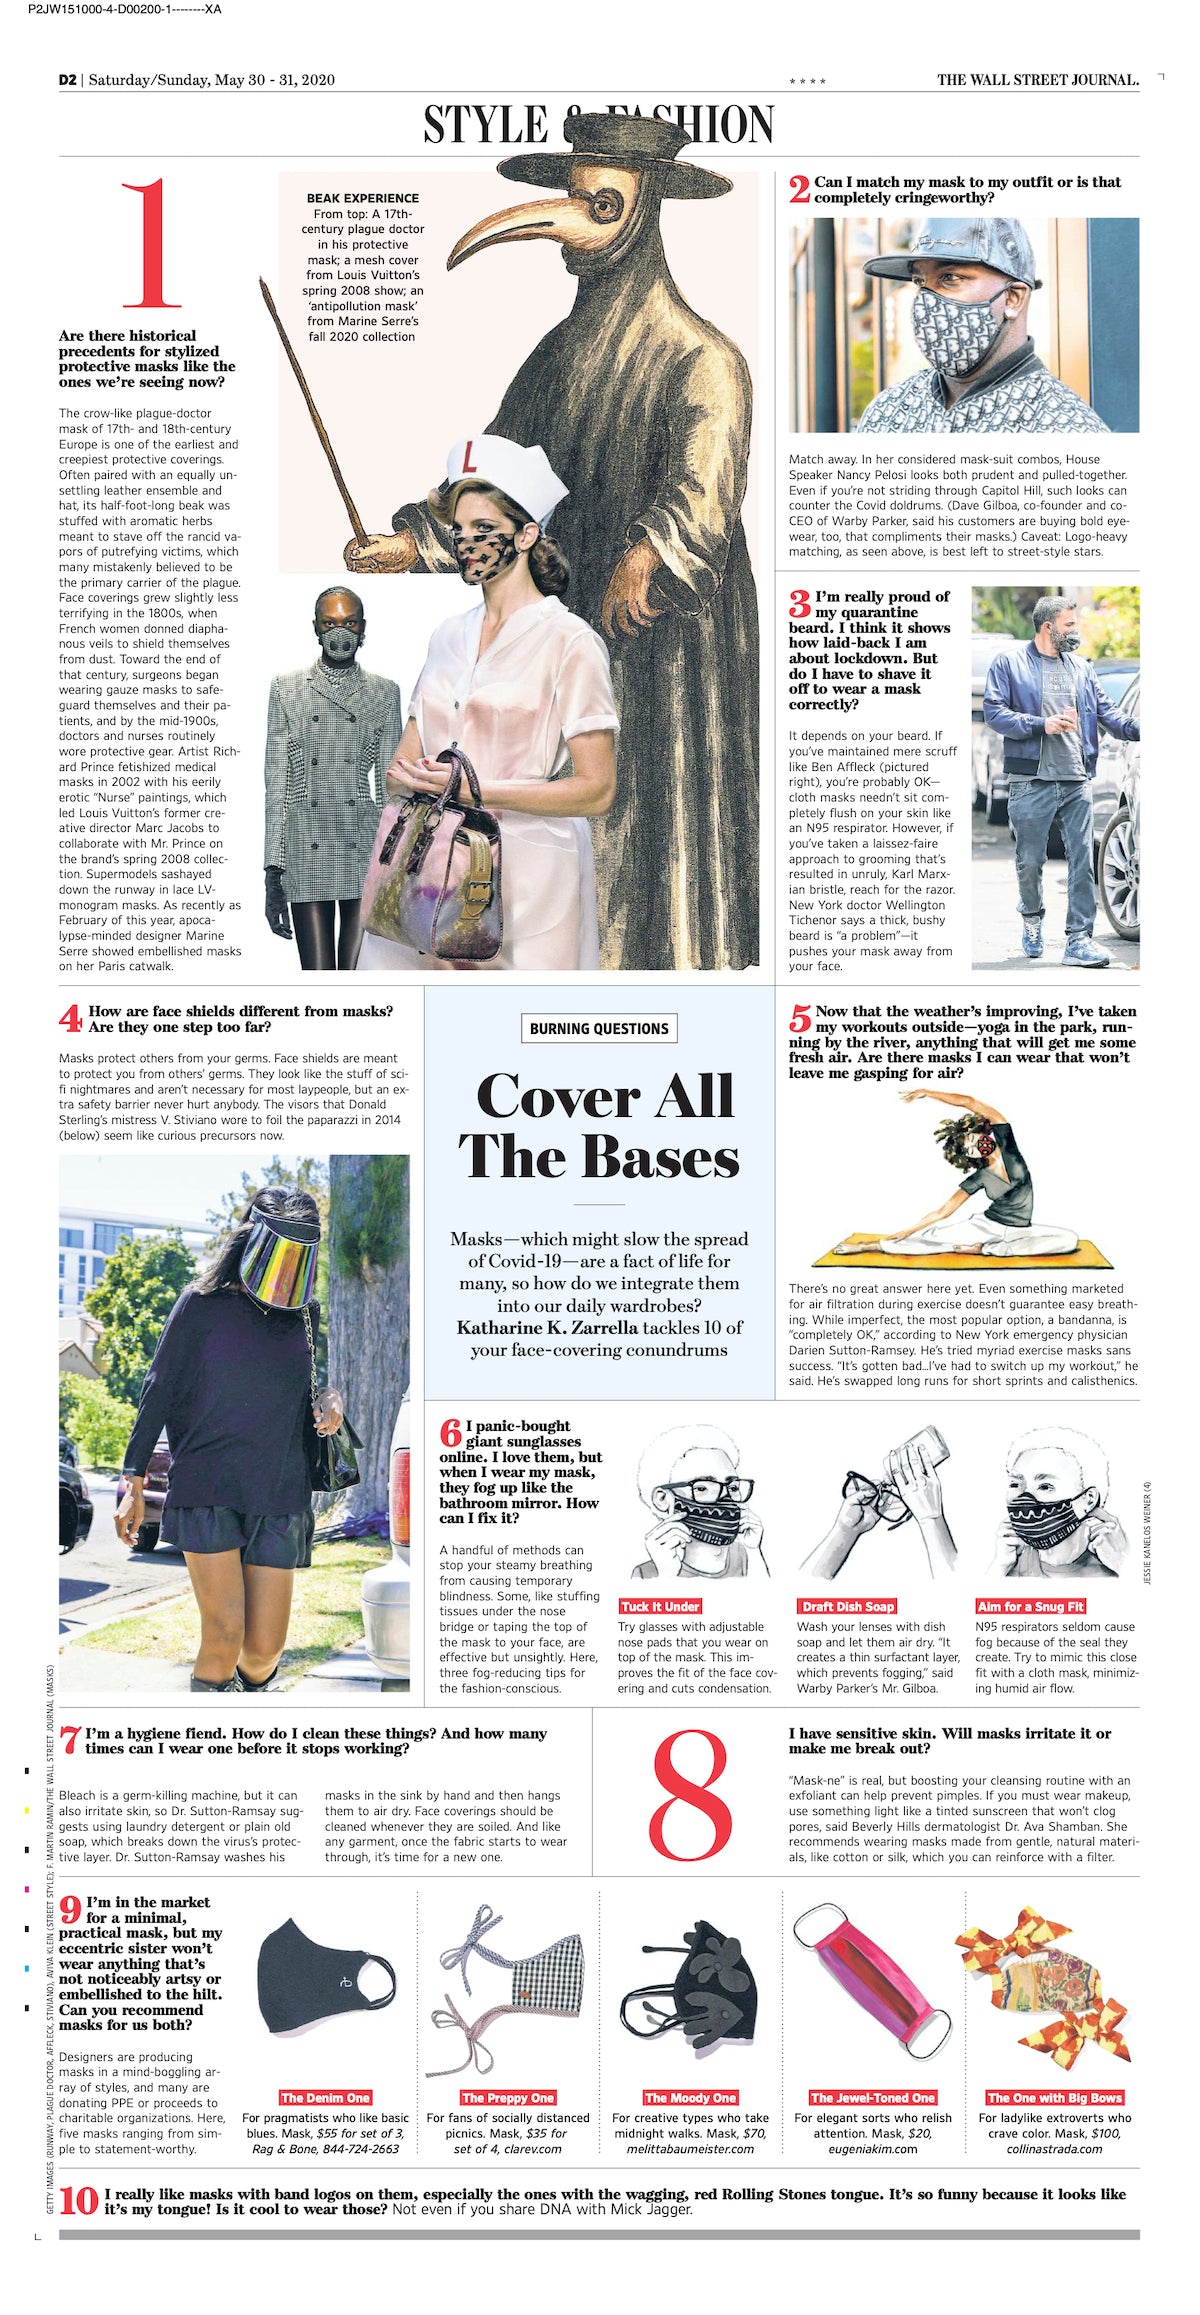 Wall Street Journal Snippet from Saturday/Sunday, May 30-32, 2020 Featuring Our Bisous Face Masks As Part of Their Cover All The Bases Story